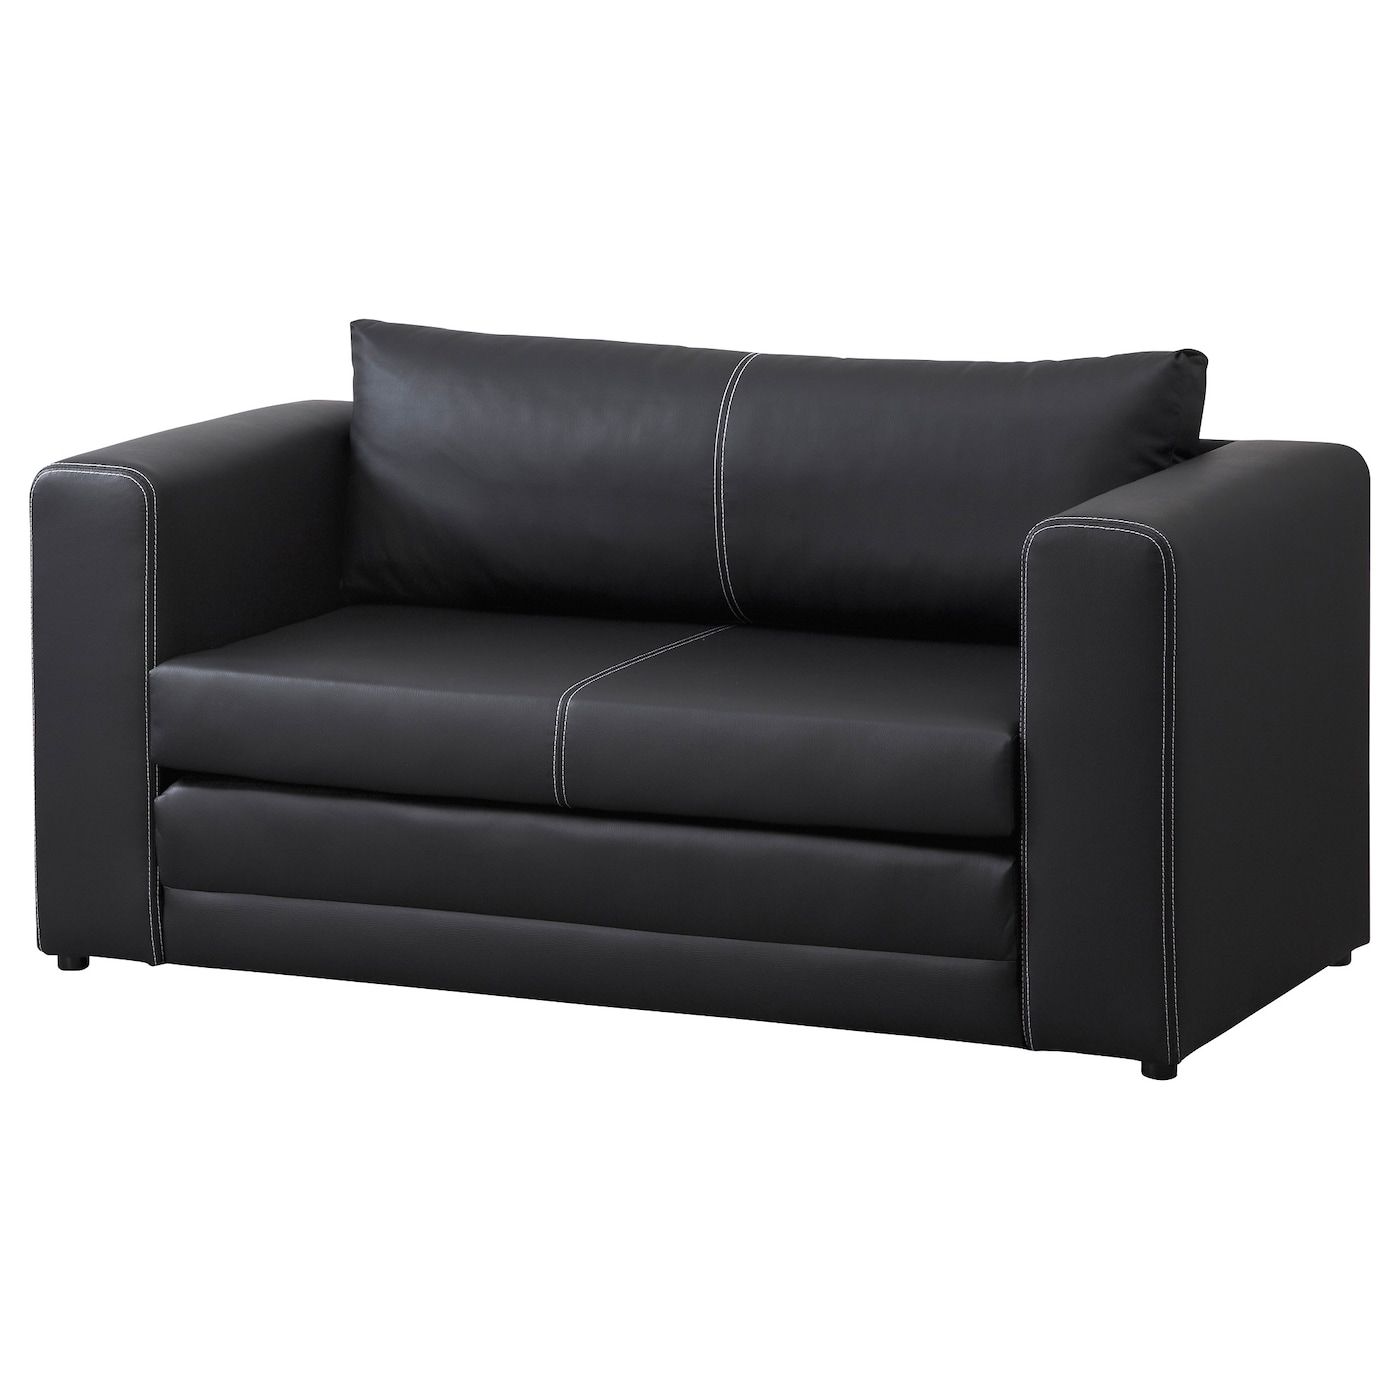 Askeby Black, Two Seat Sofa Bed – Ikea In Black Velvet 2 Seater Sofa Beds (View 7 of 20)